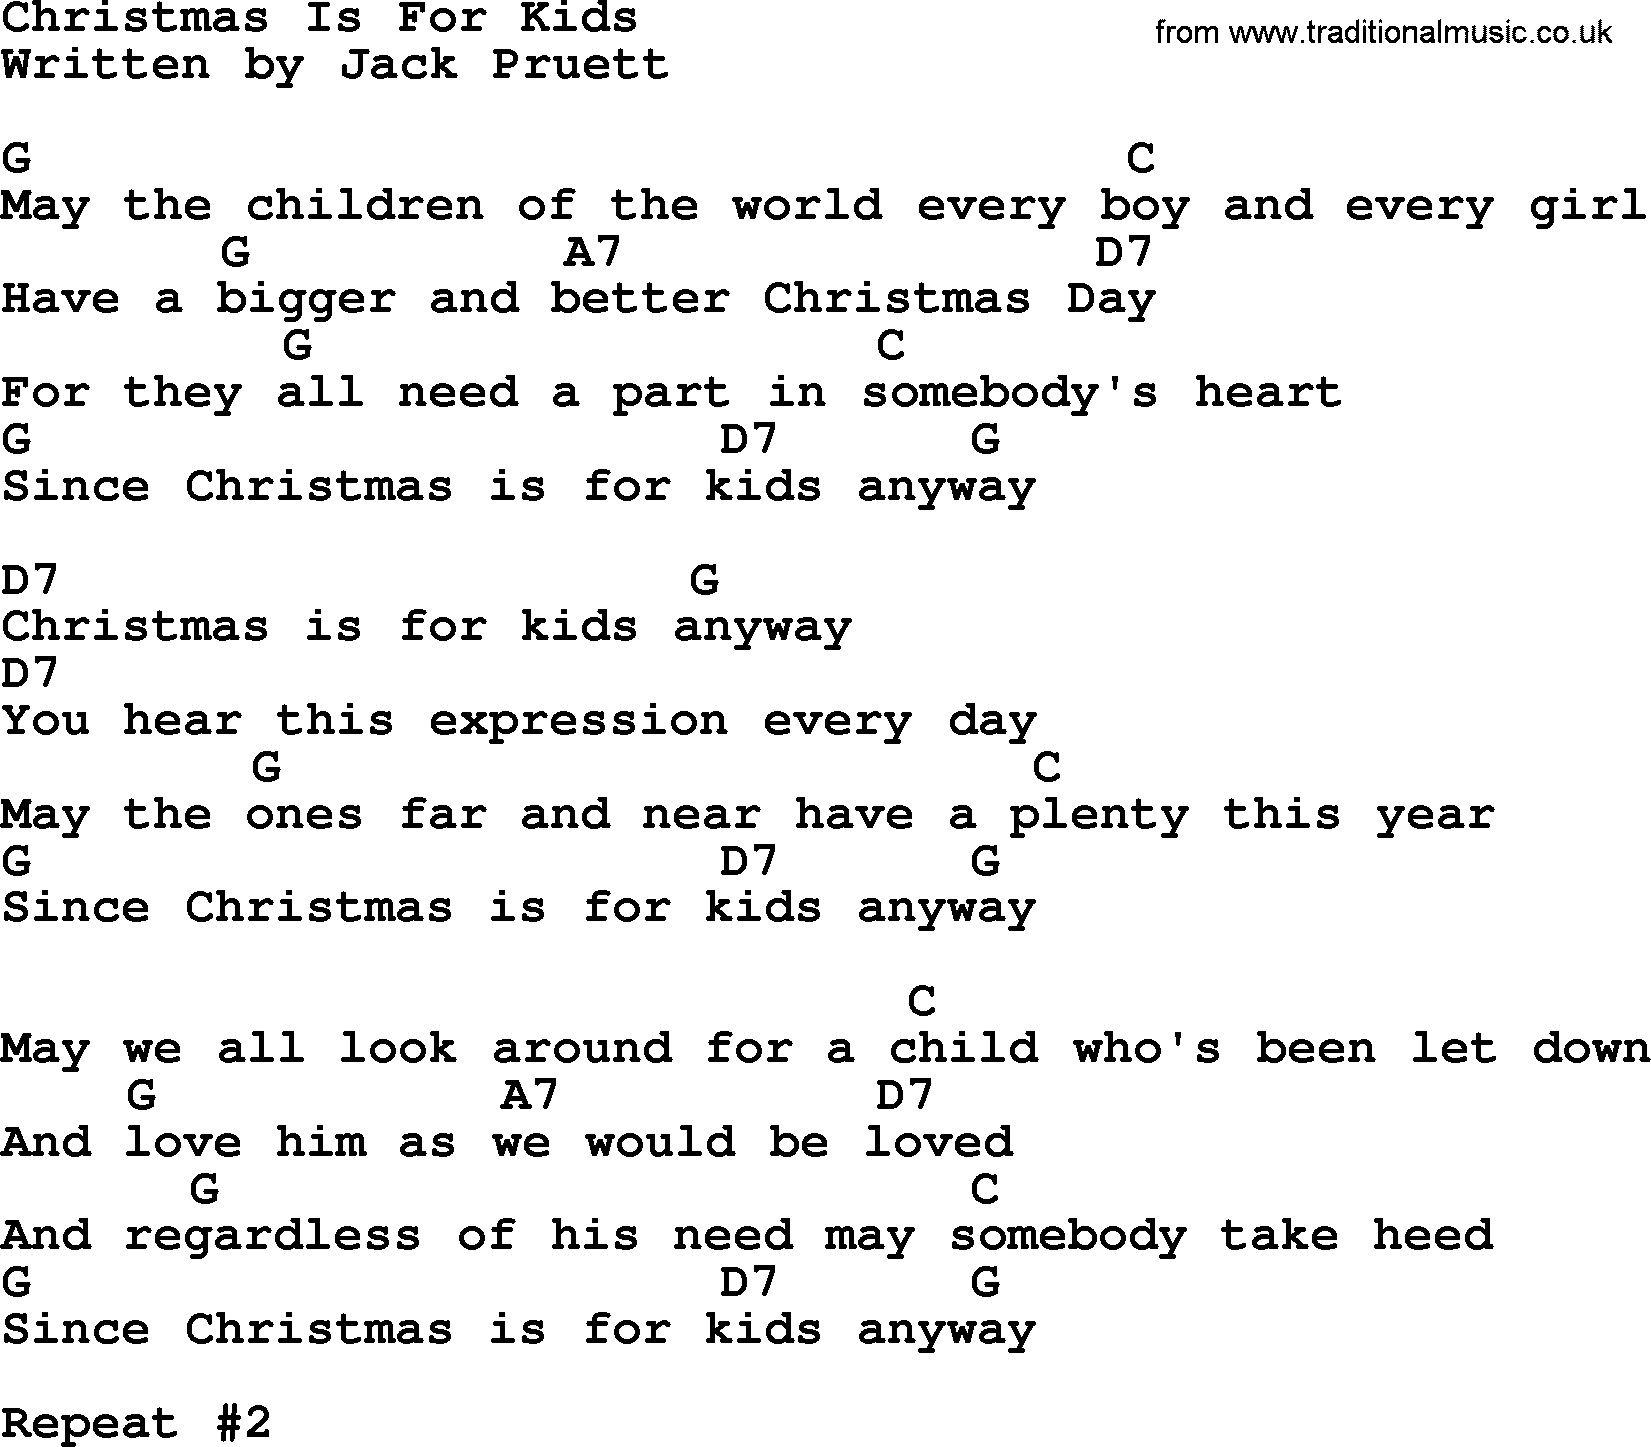 Marty Robbins song: Christmas Is For Kids, lyrics and chords